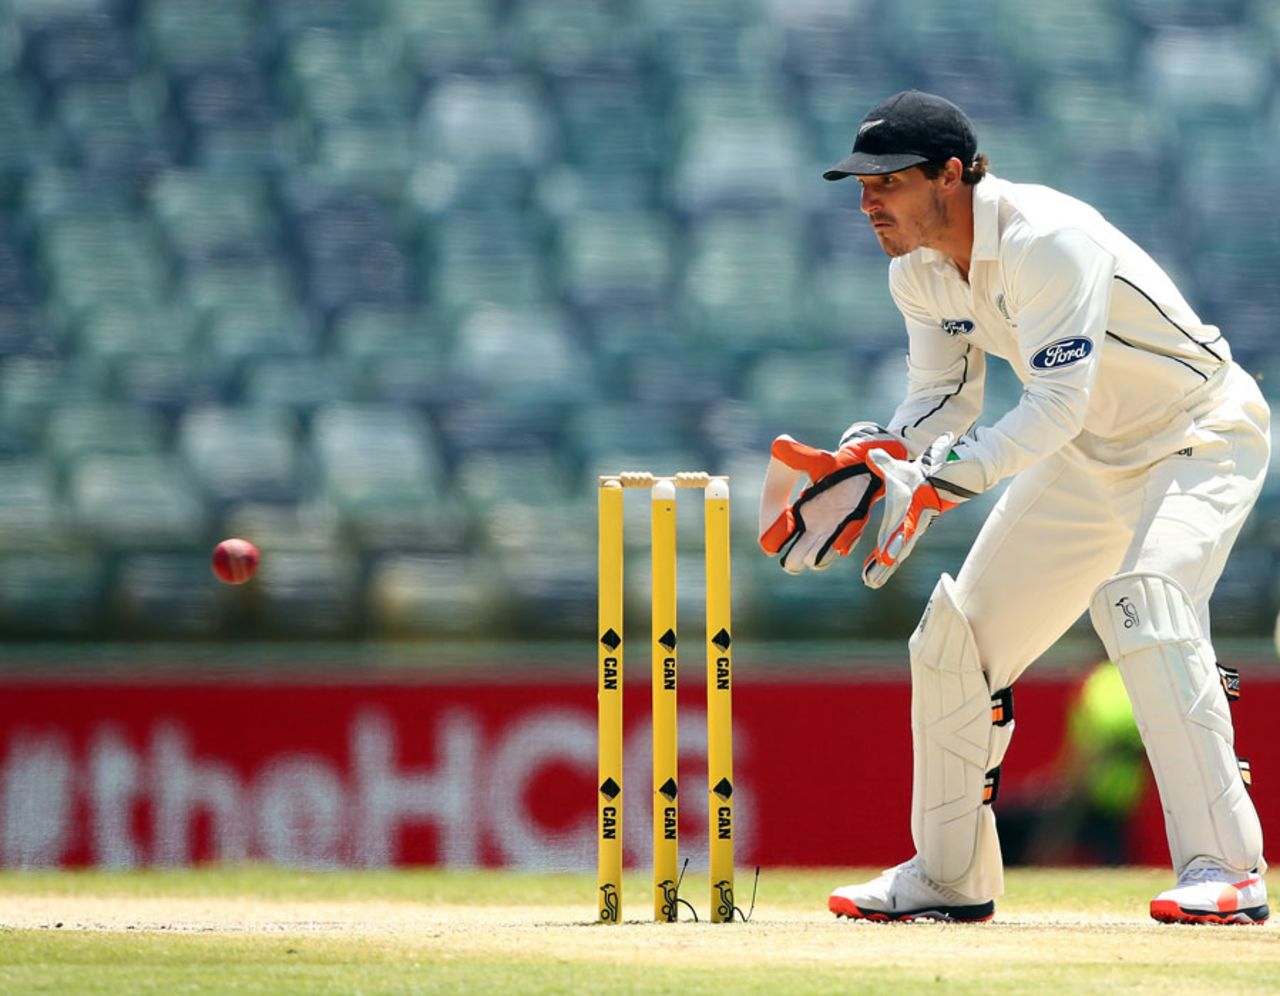 BJ Watling is all concentration as the ball arrives, Australia v New Zealand, 2nd Test, Perth, 5th day, November 17, 2015